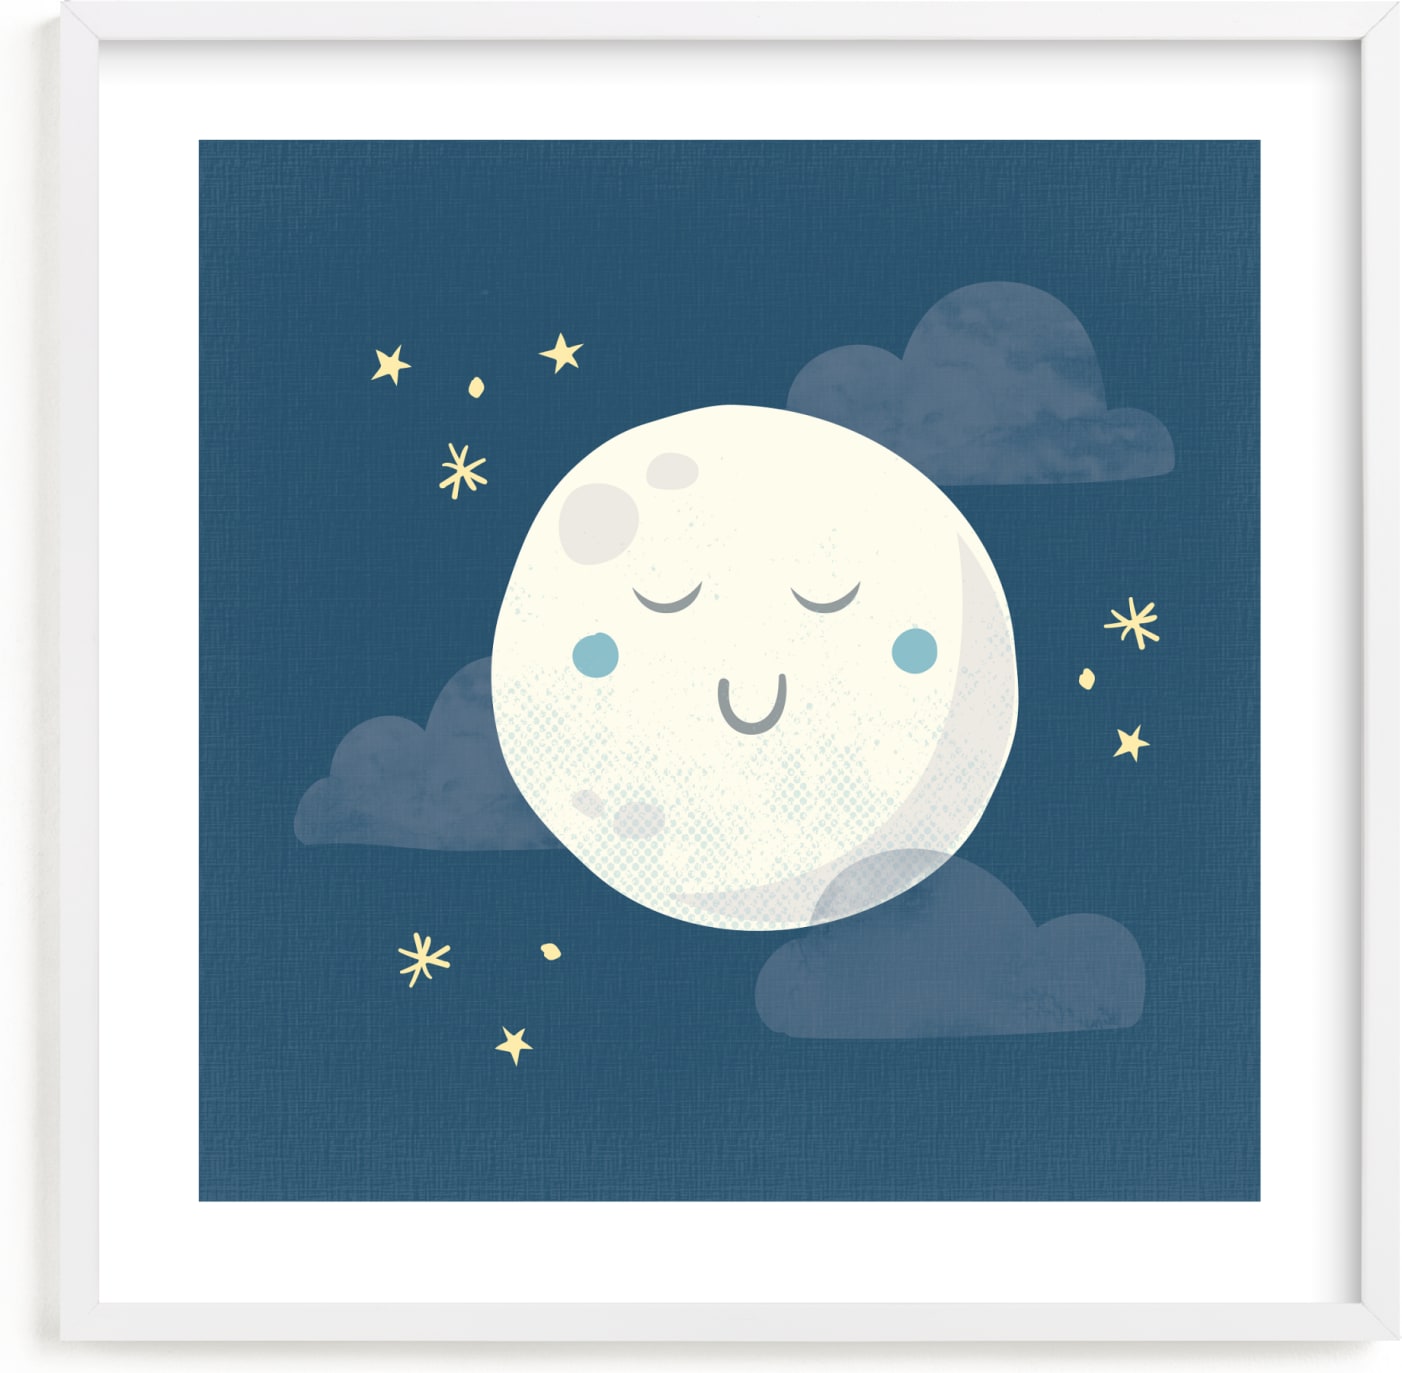 This is a blue art by Annie Holmquist called Goodnight moon.